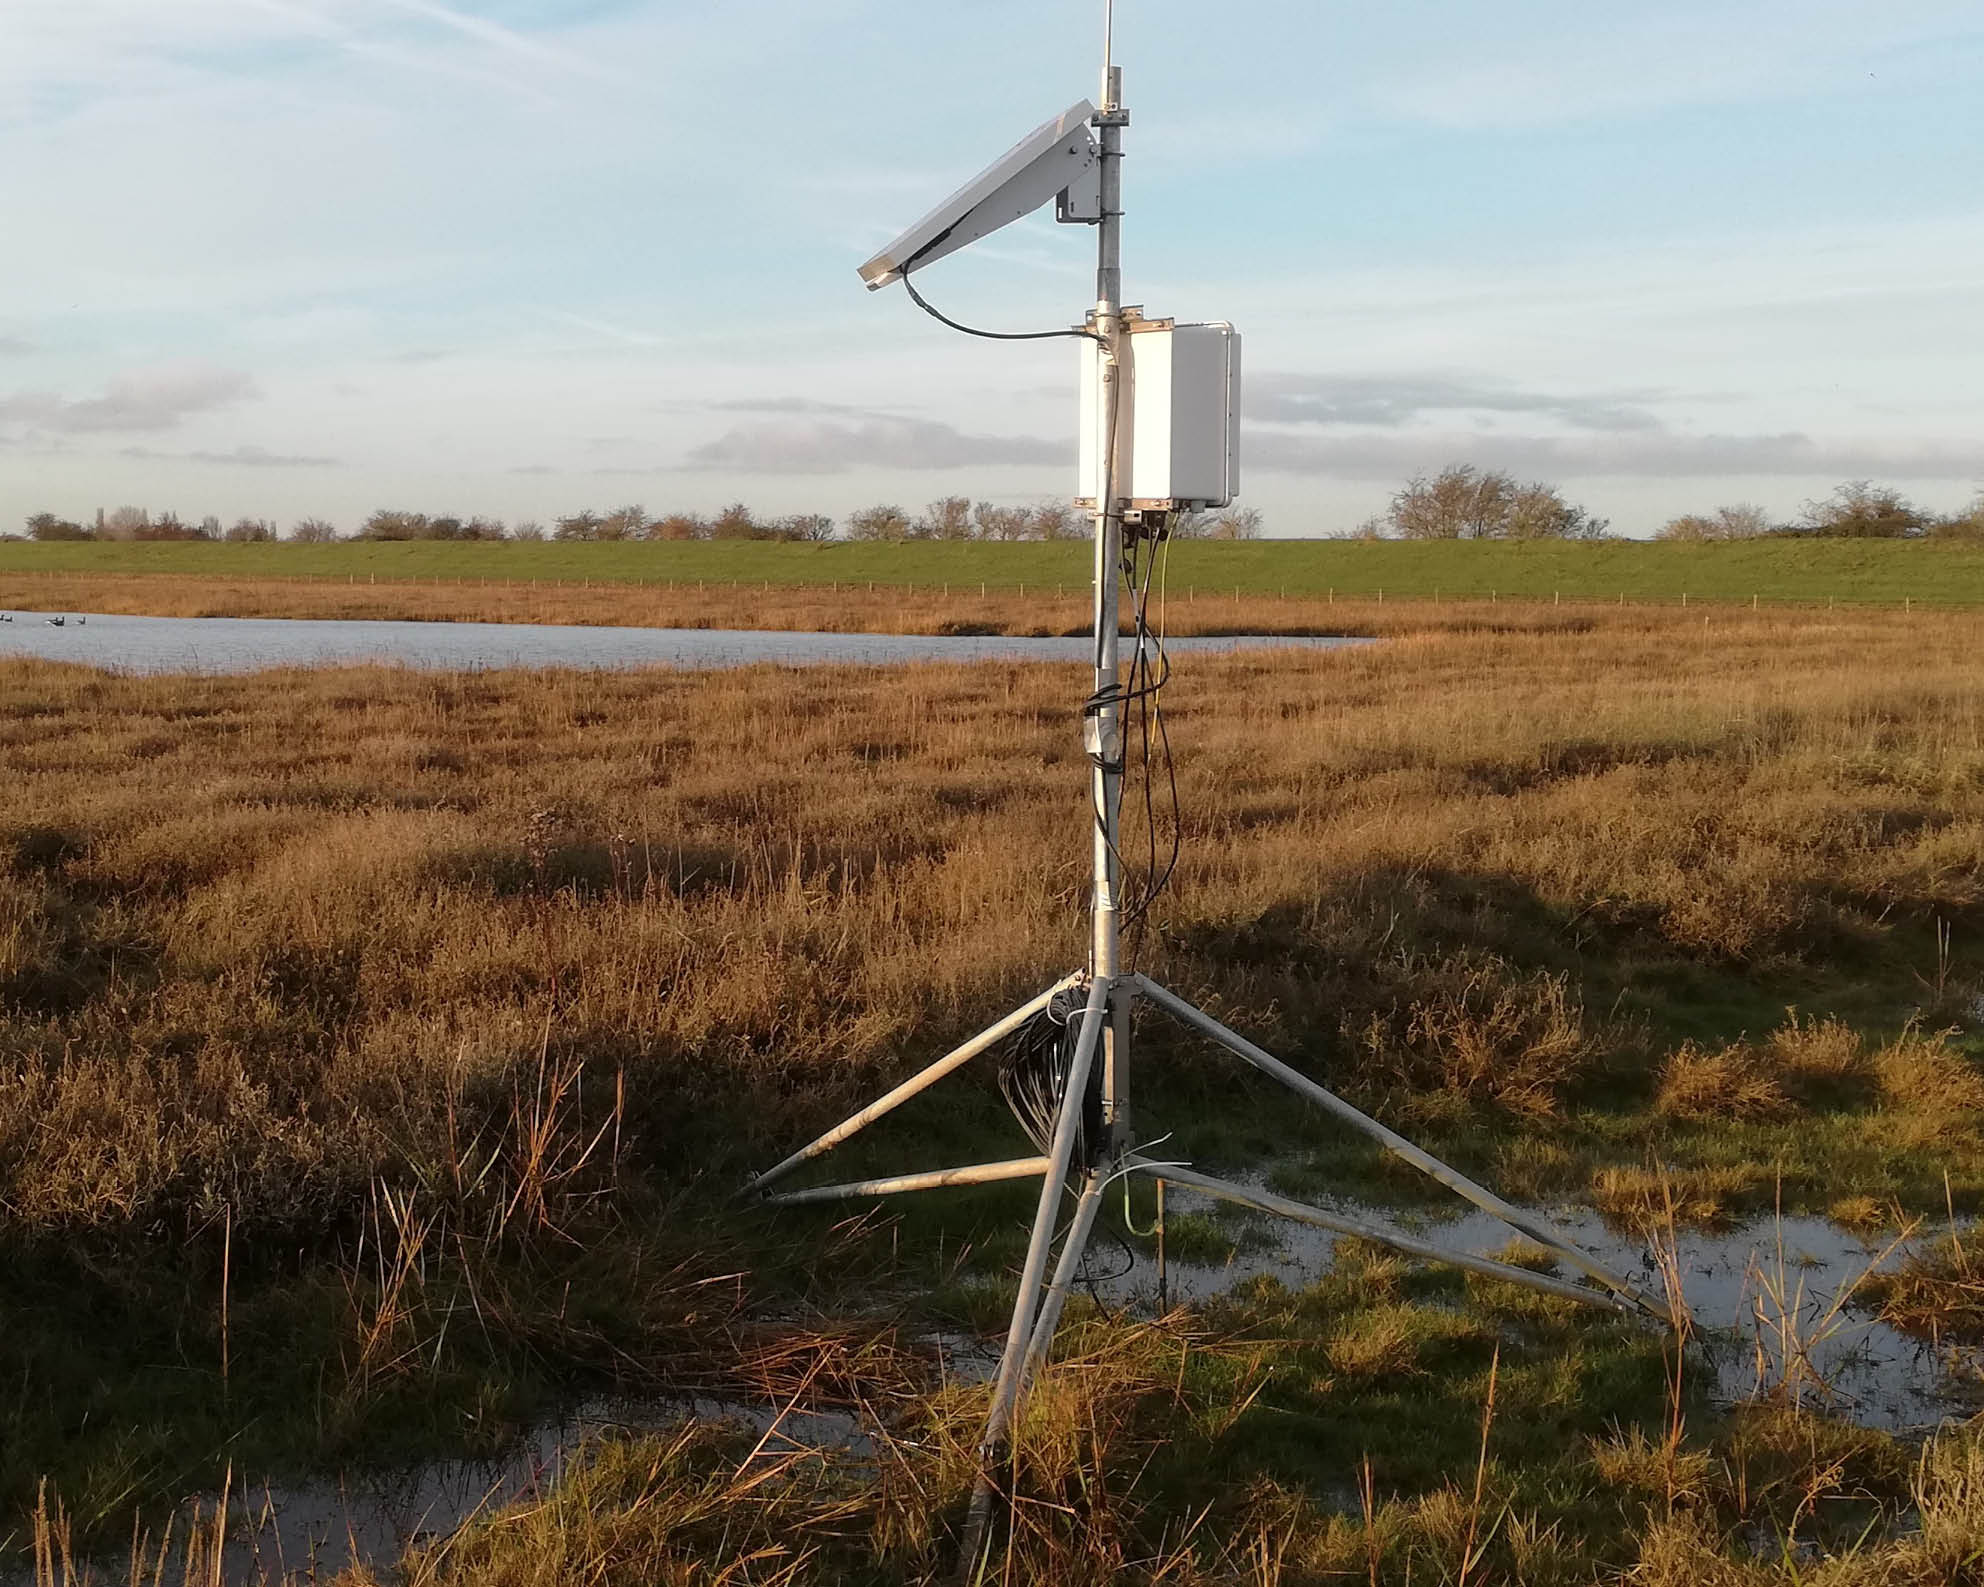 Observation equipment on a tripod, stood in a waterlogged field